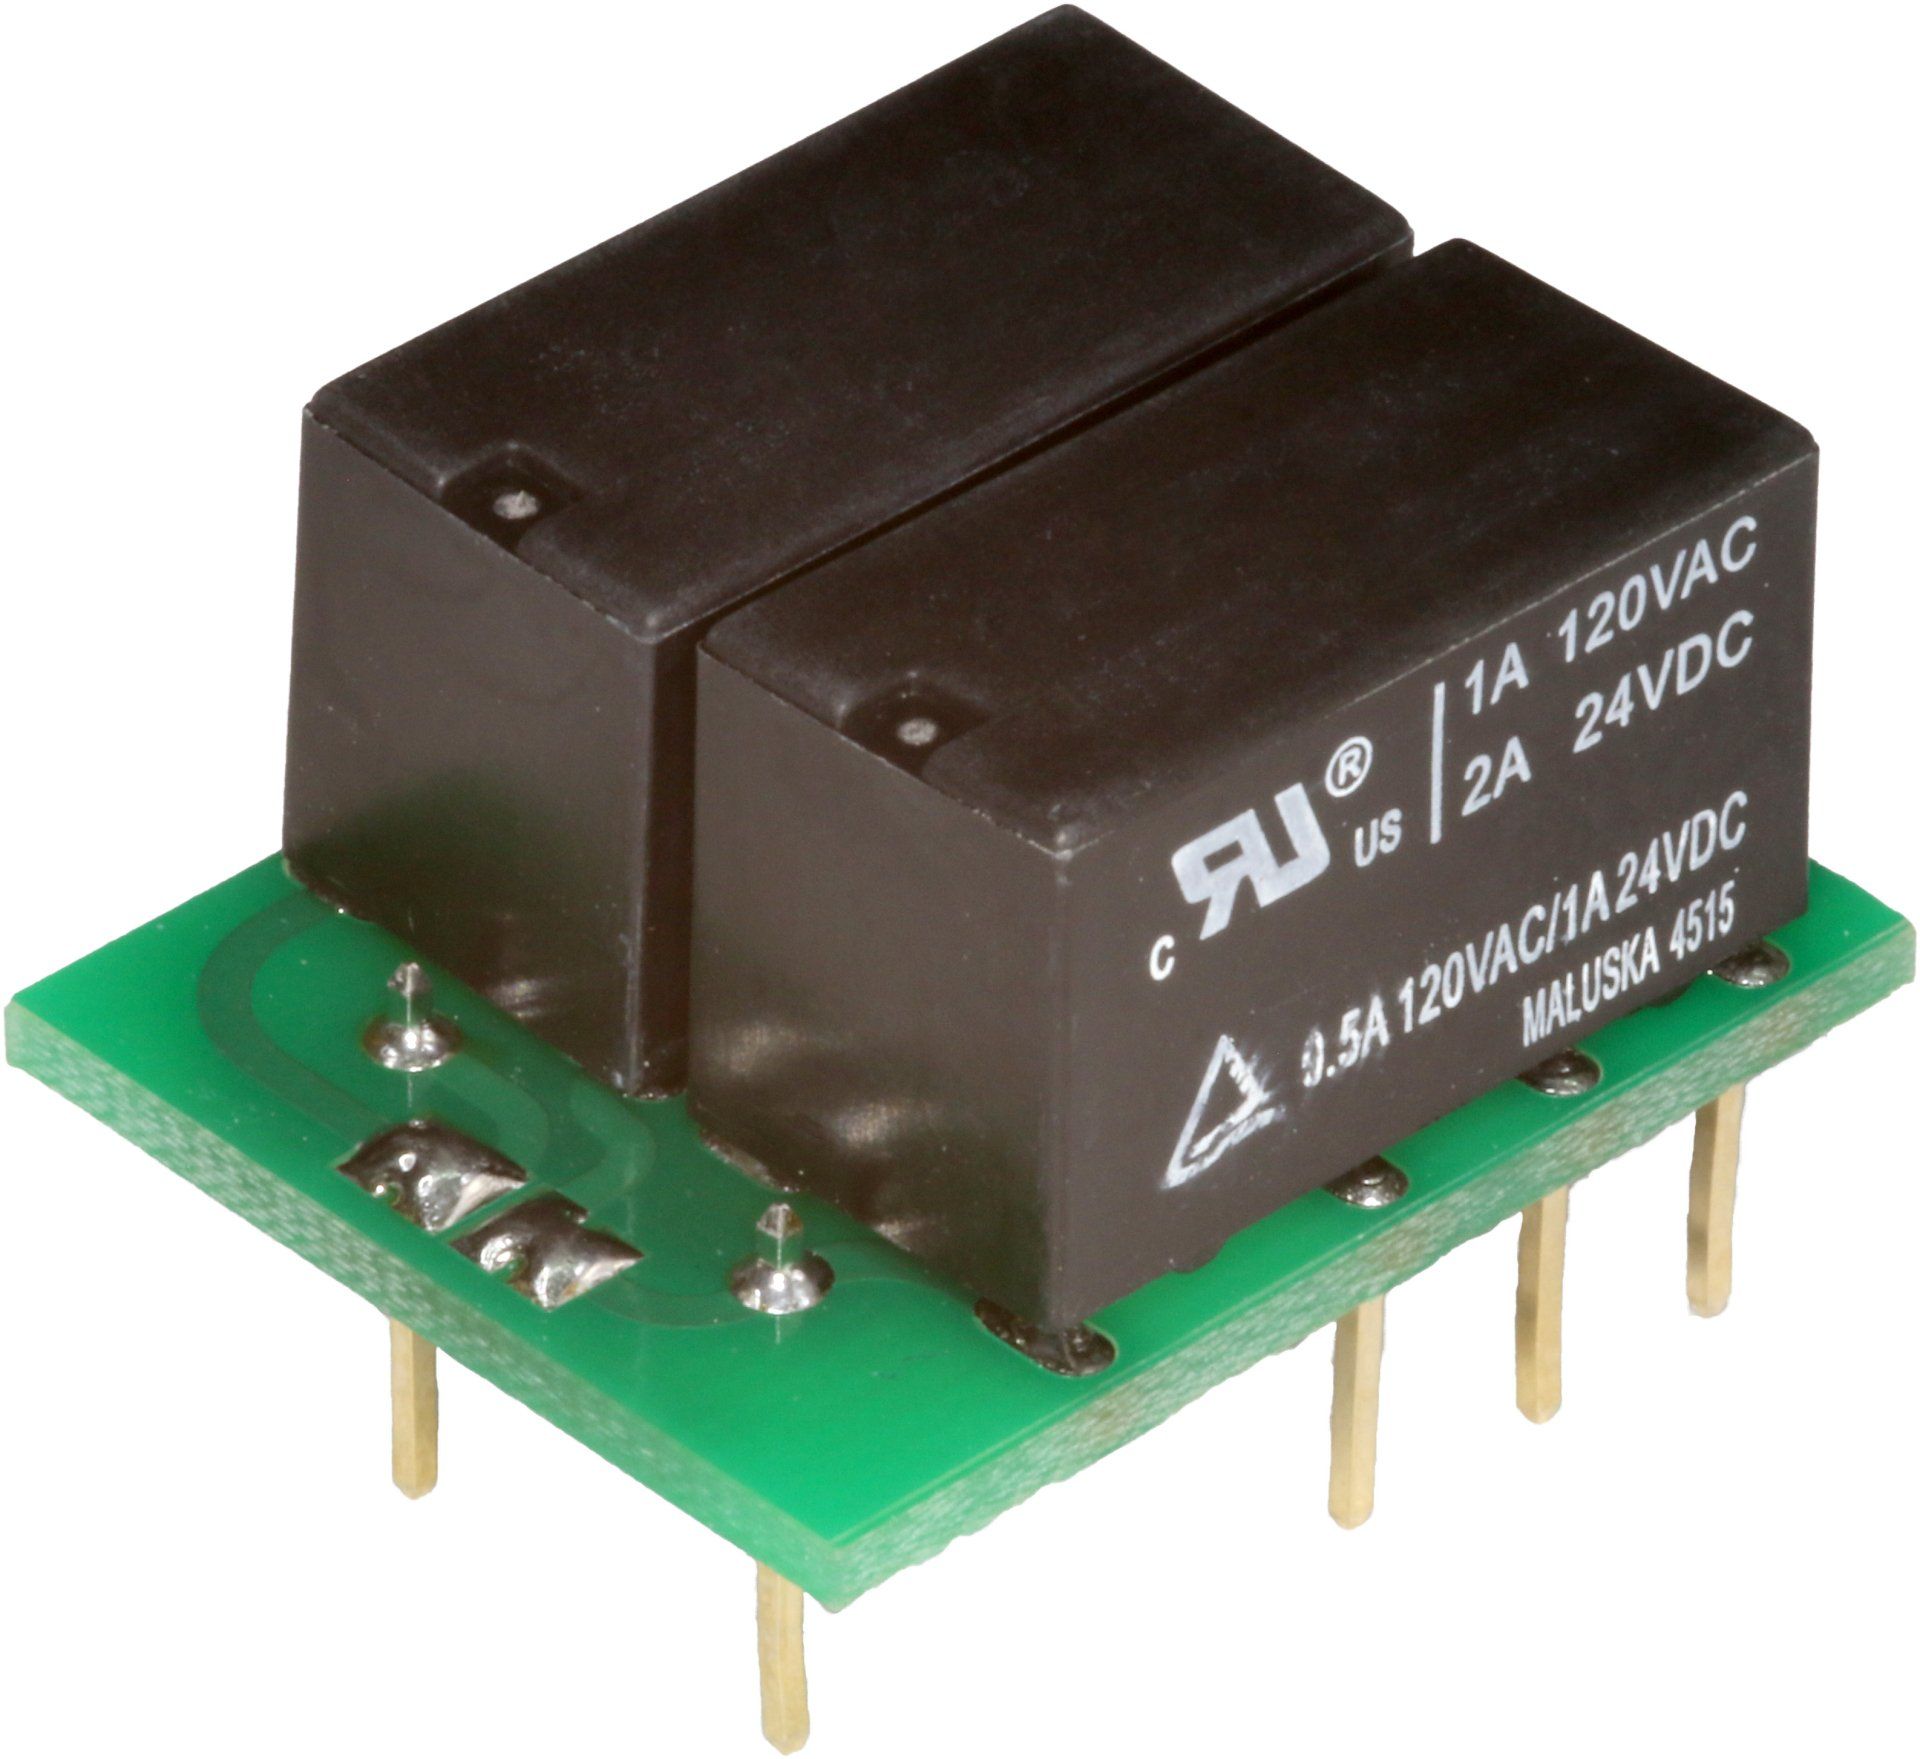 Quality replacement relay for ITT A26 xx from revox-online